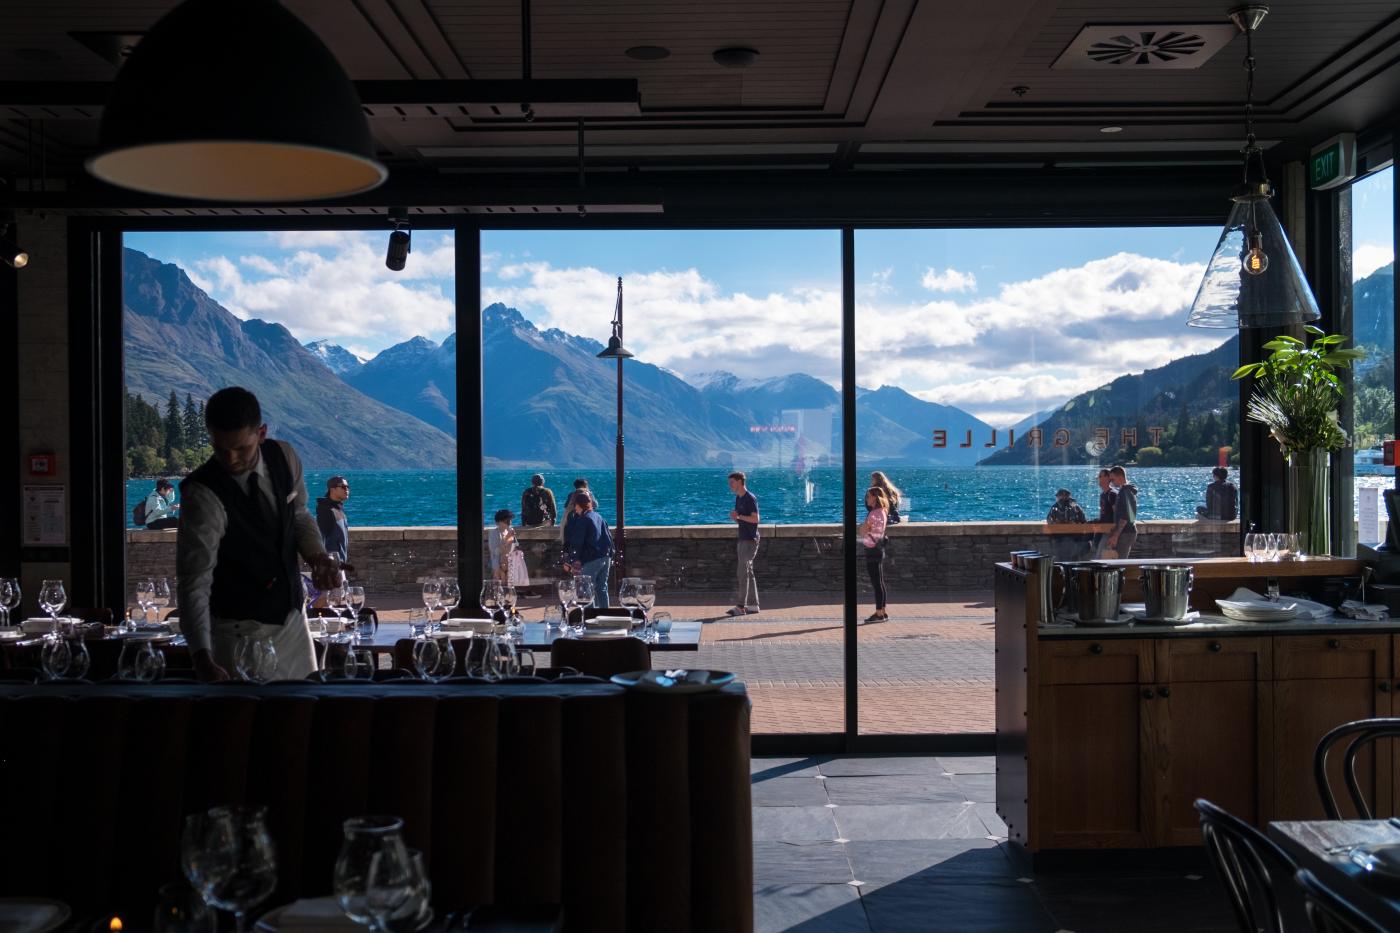 Interior view of The Grille Restaurant looking over Lake Whakatipu and mountains